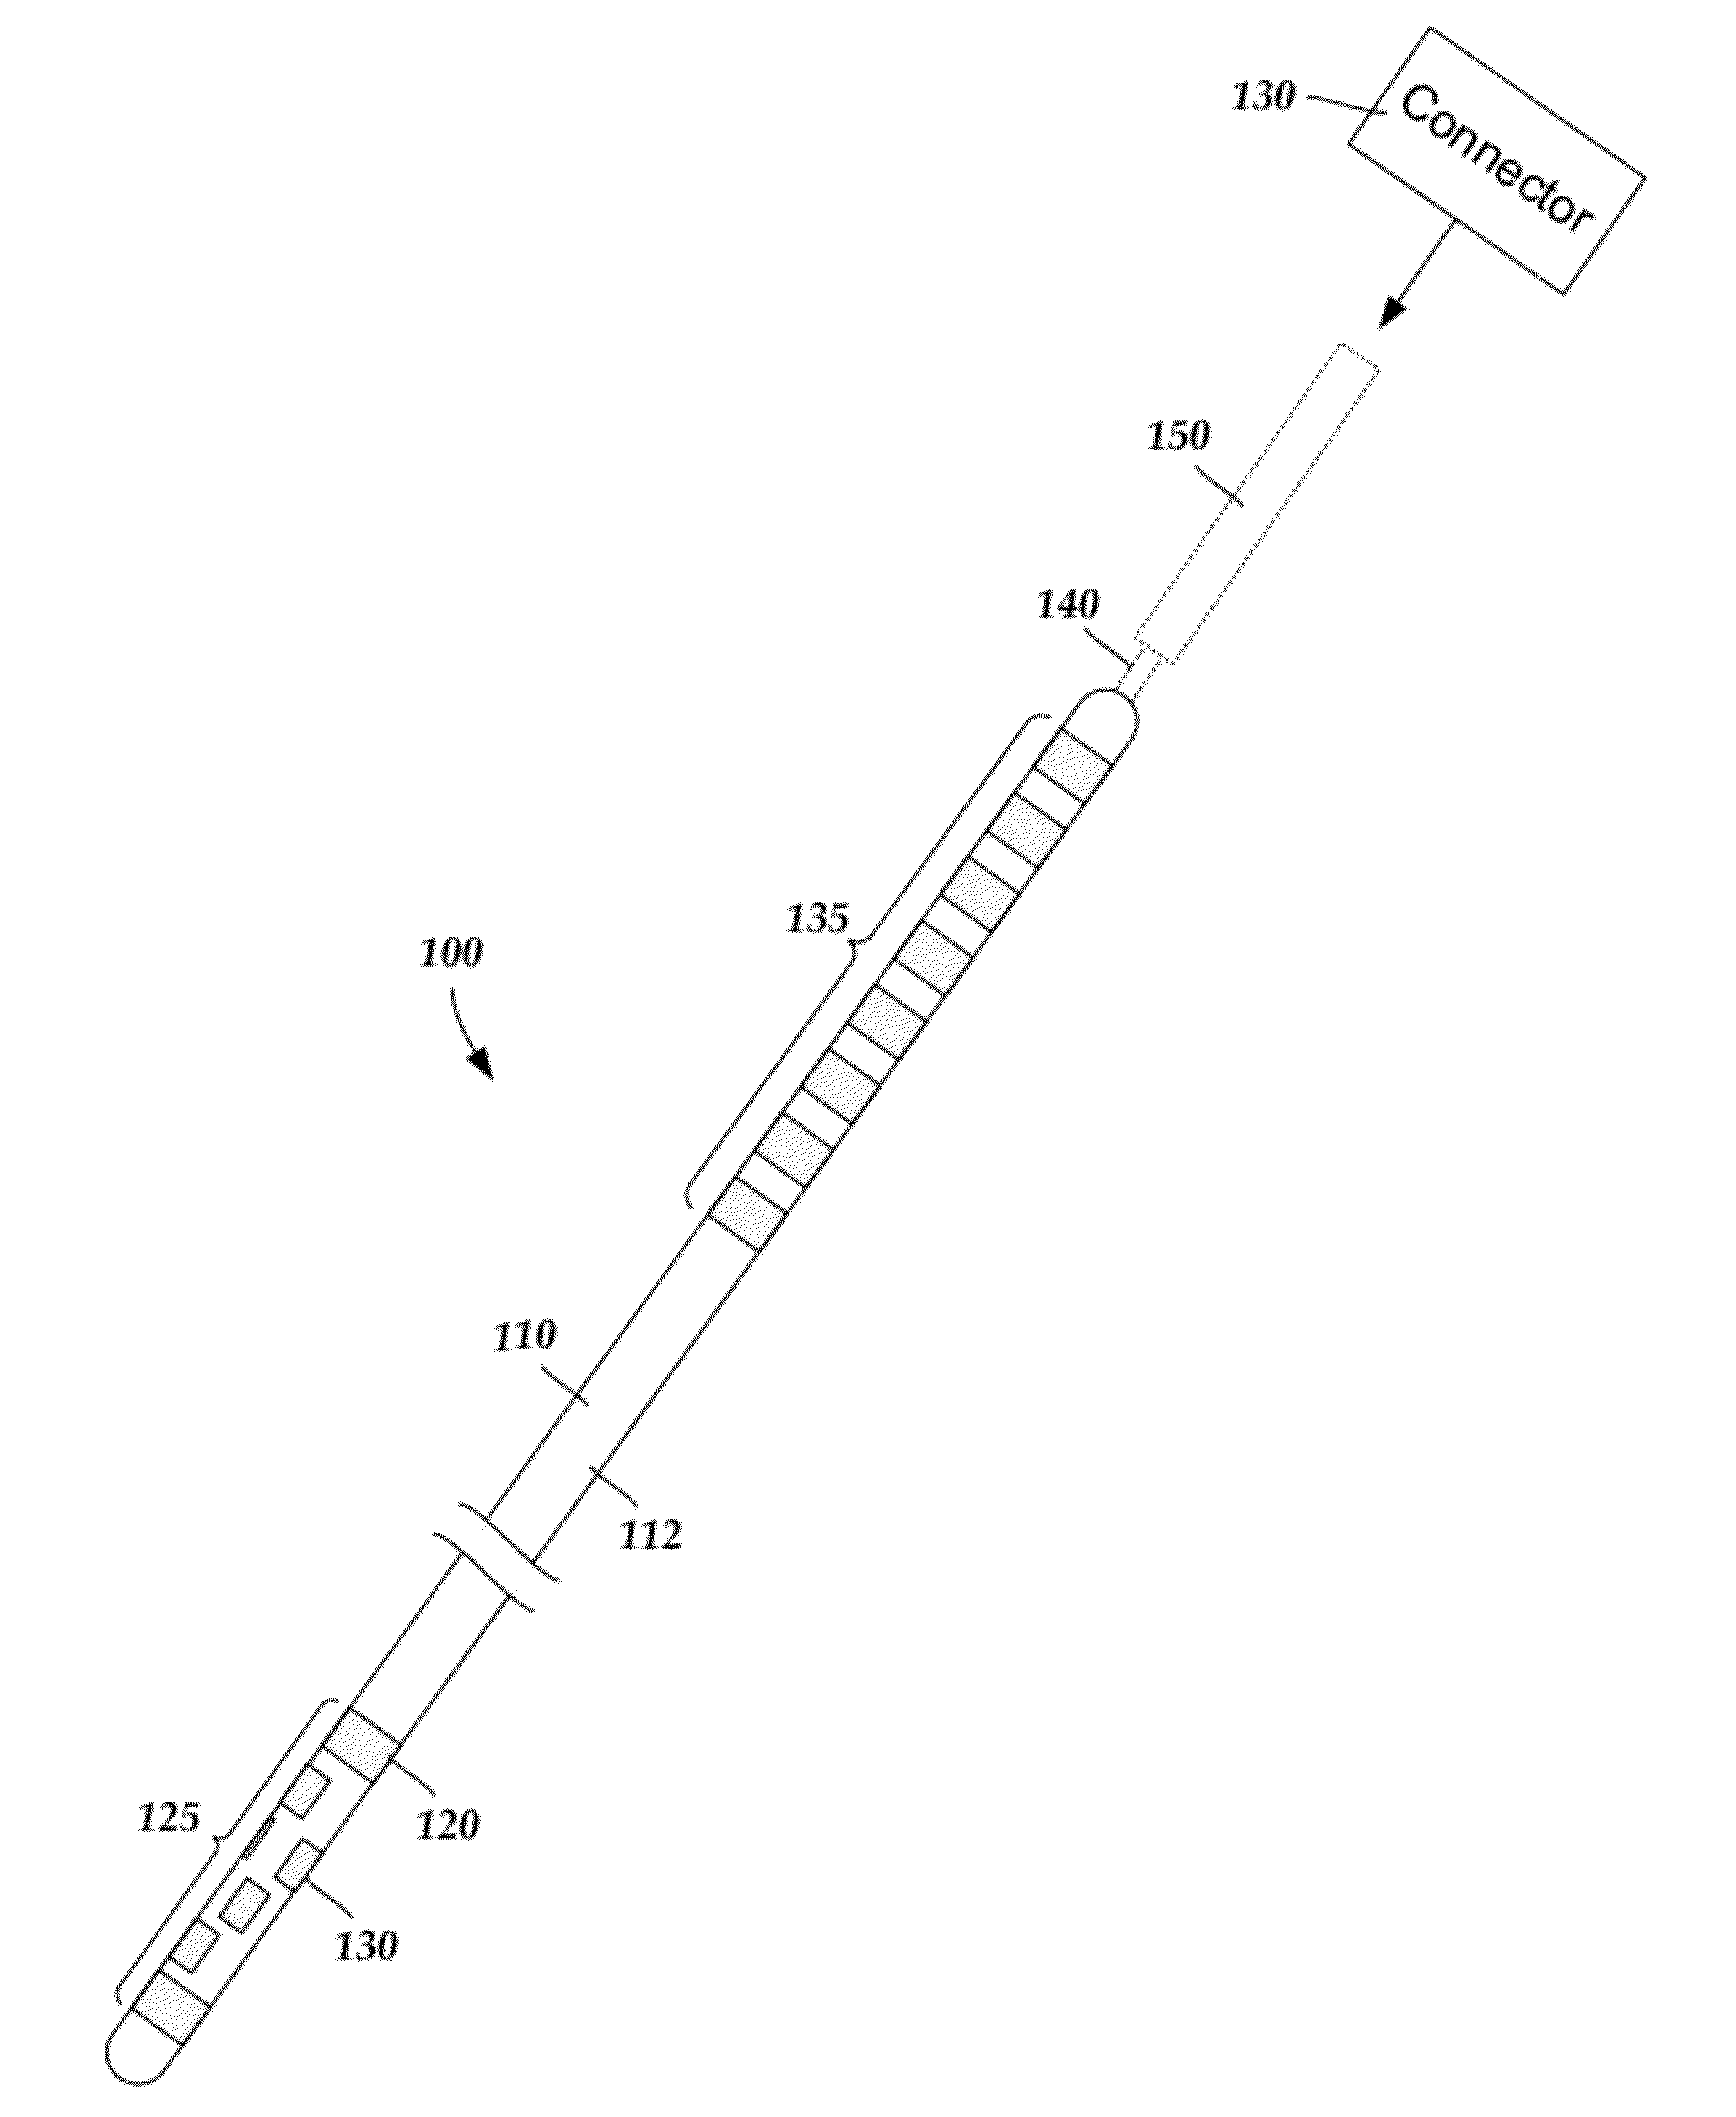 Leads with spiral of helical segmented electrode arrays and methods of making and using the leads